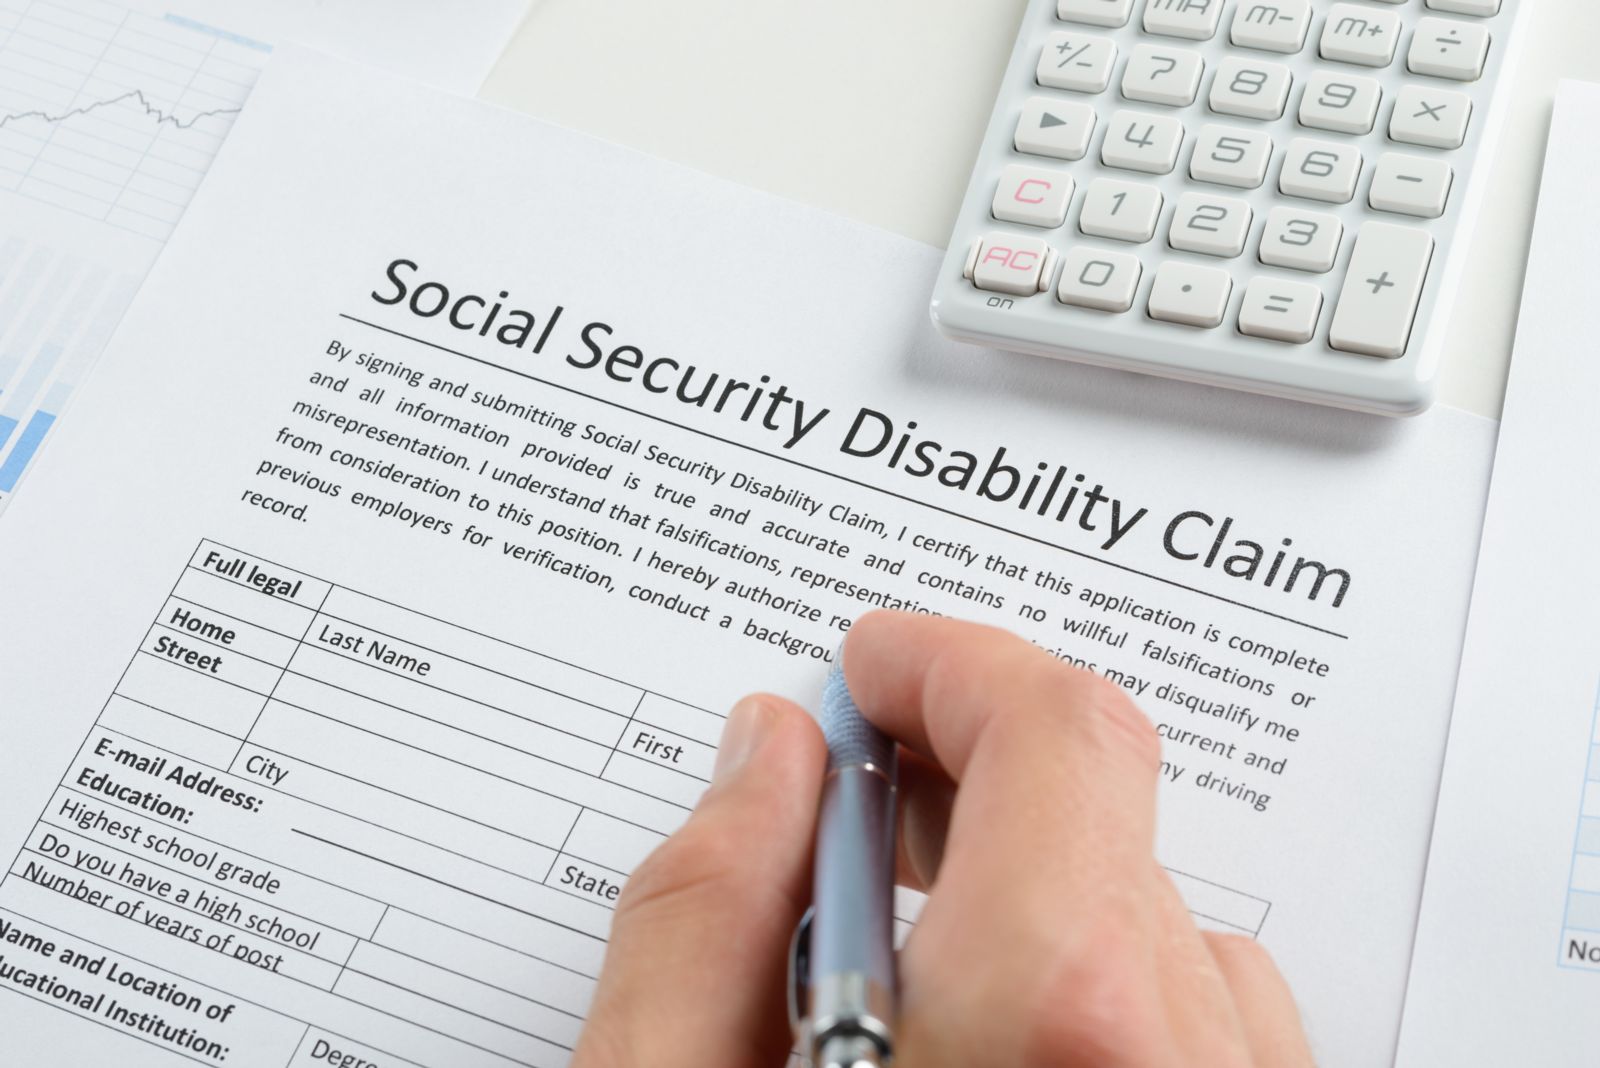 How to File a Disability Claim